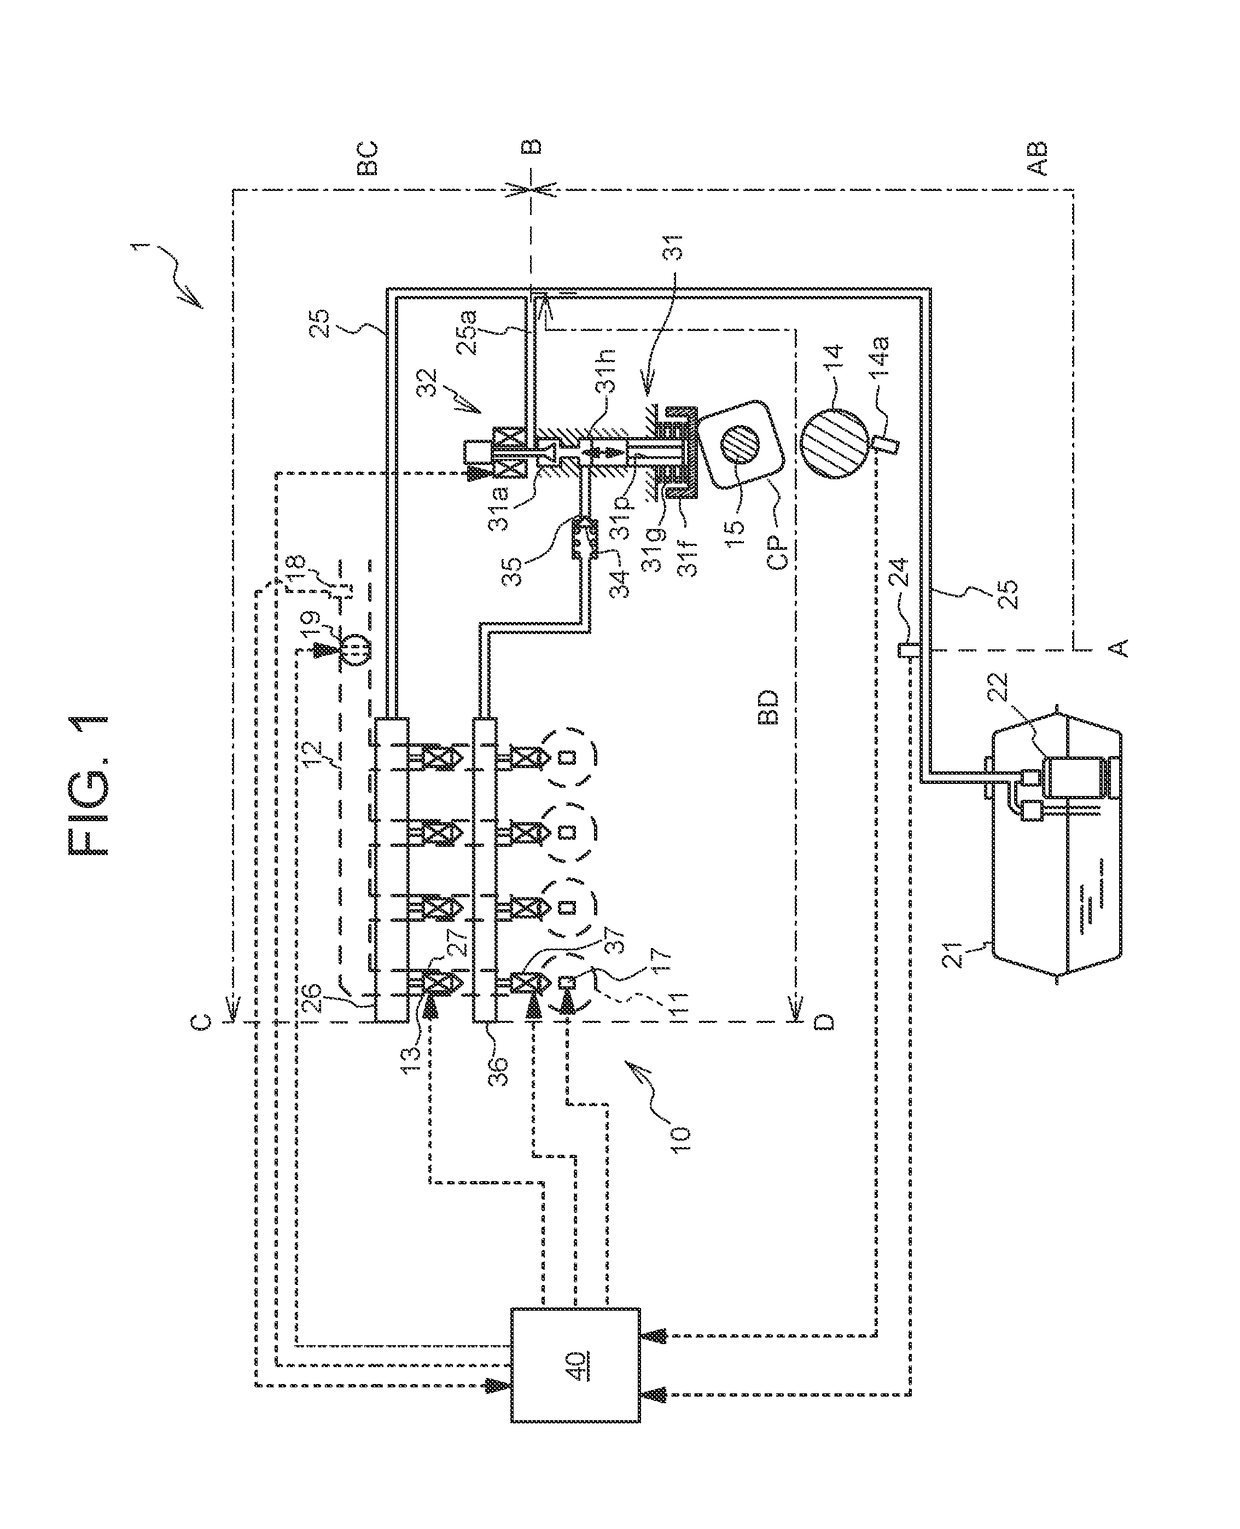 Ignition timing control device for internal combustion engine